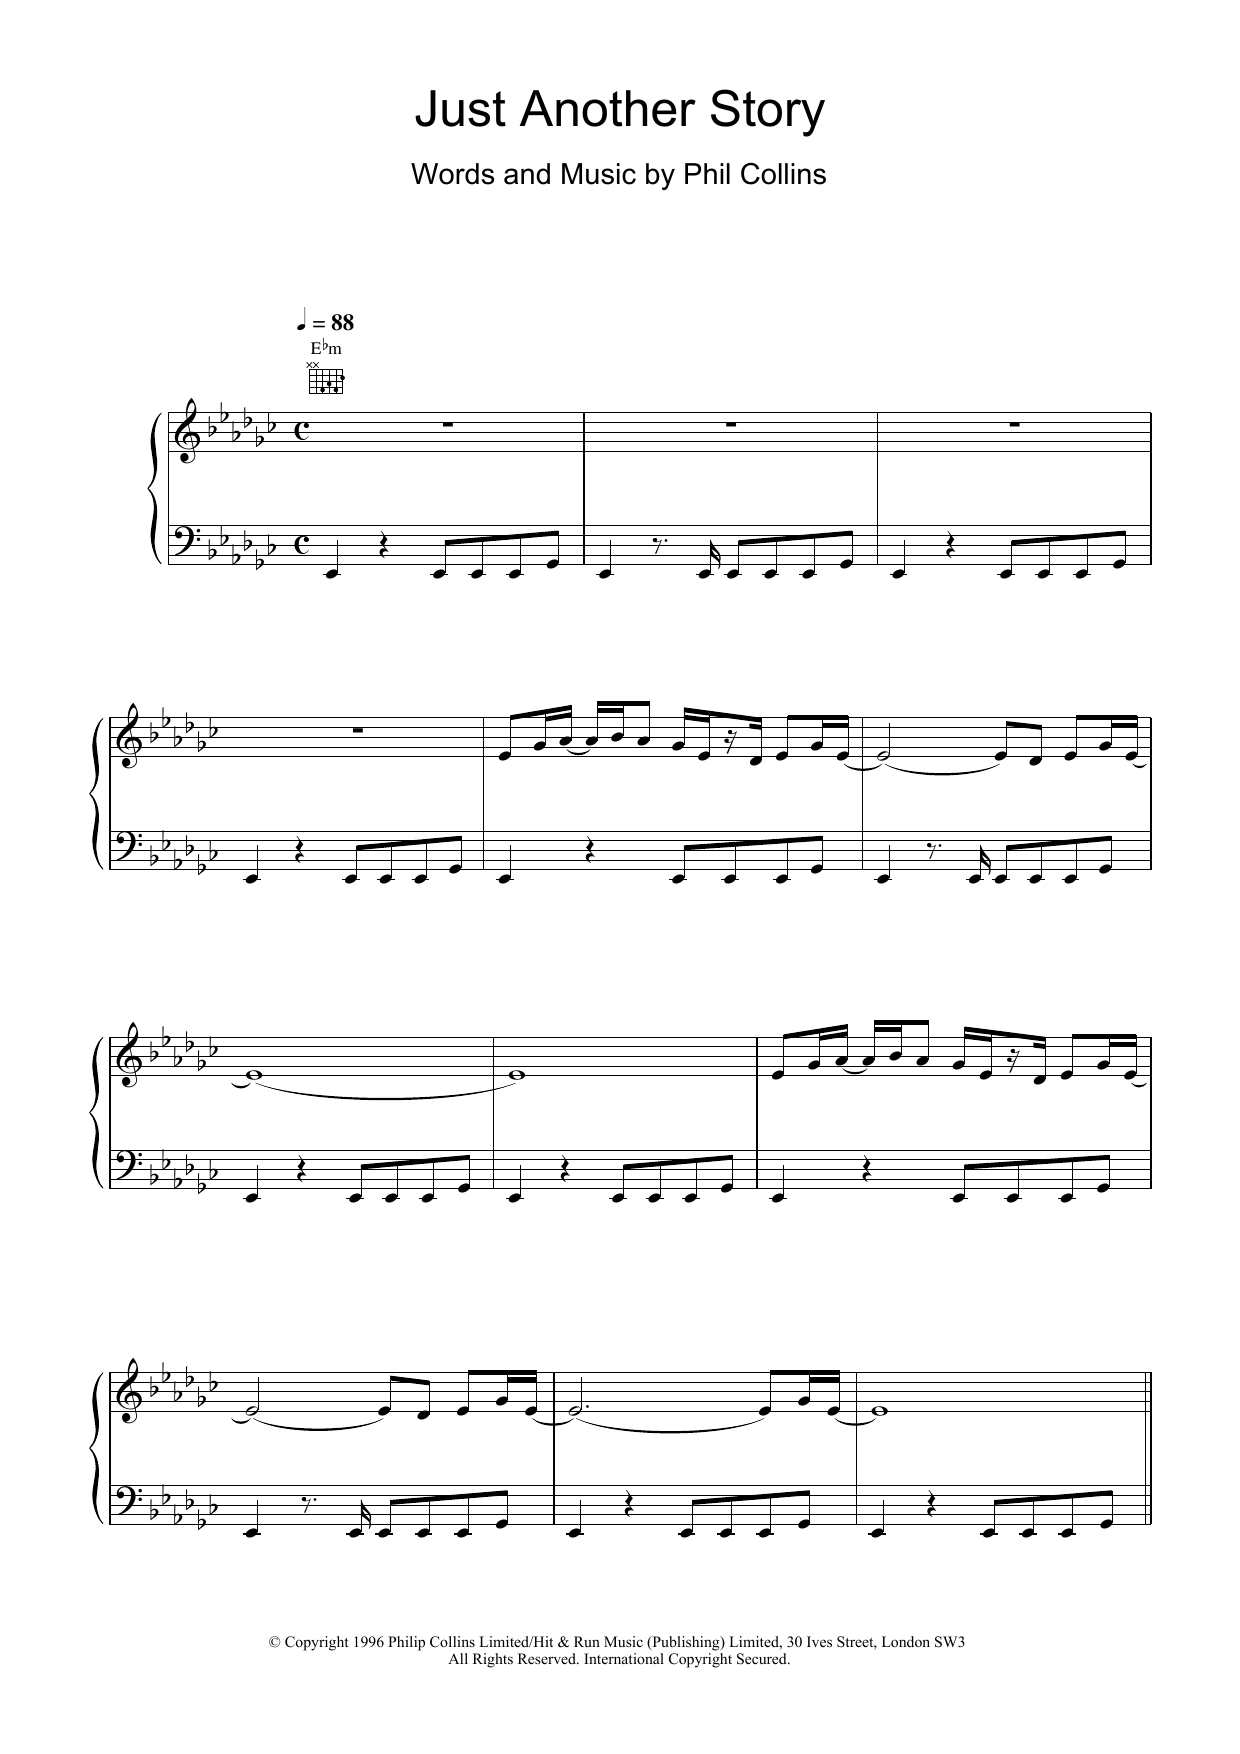 Download Phil Collins Just Another Story Sheet Music